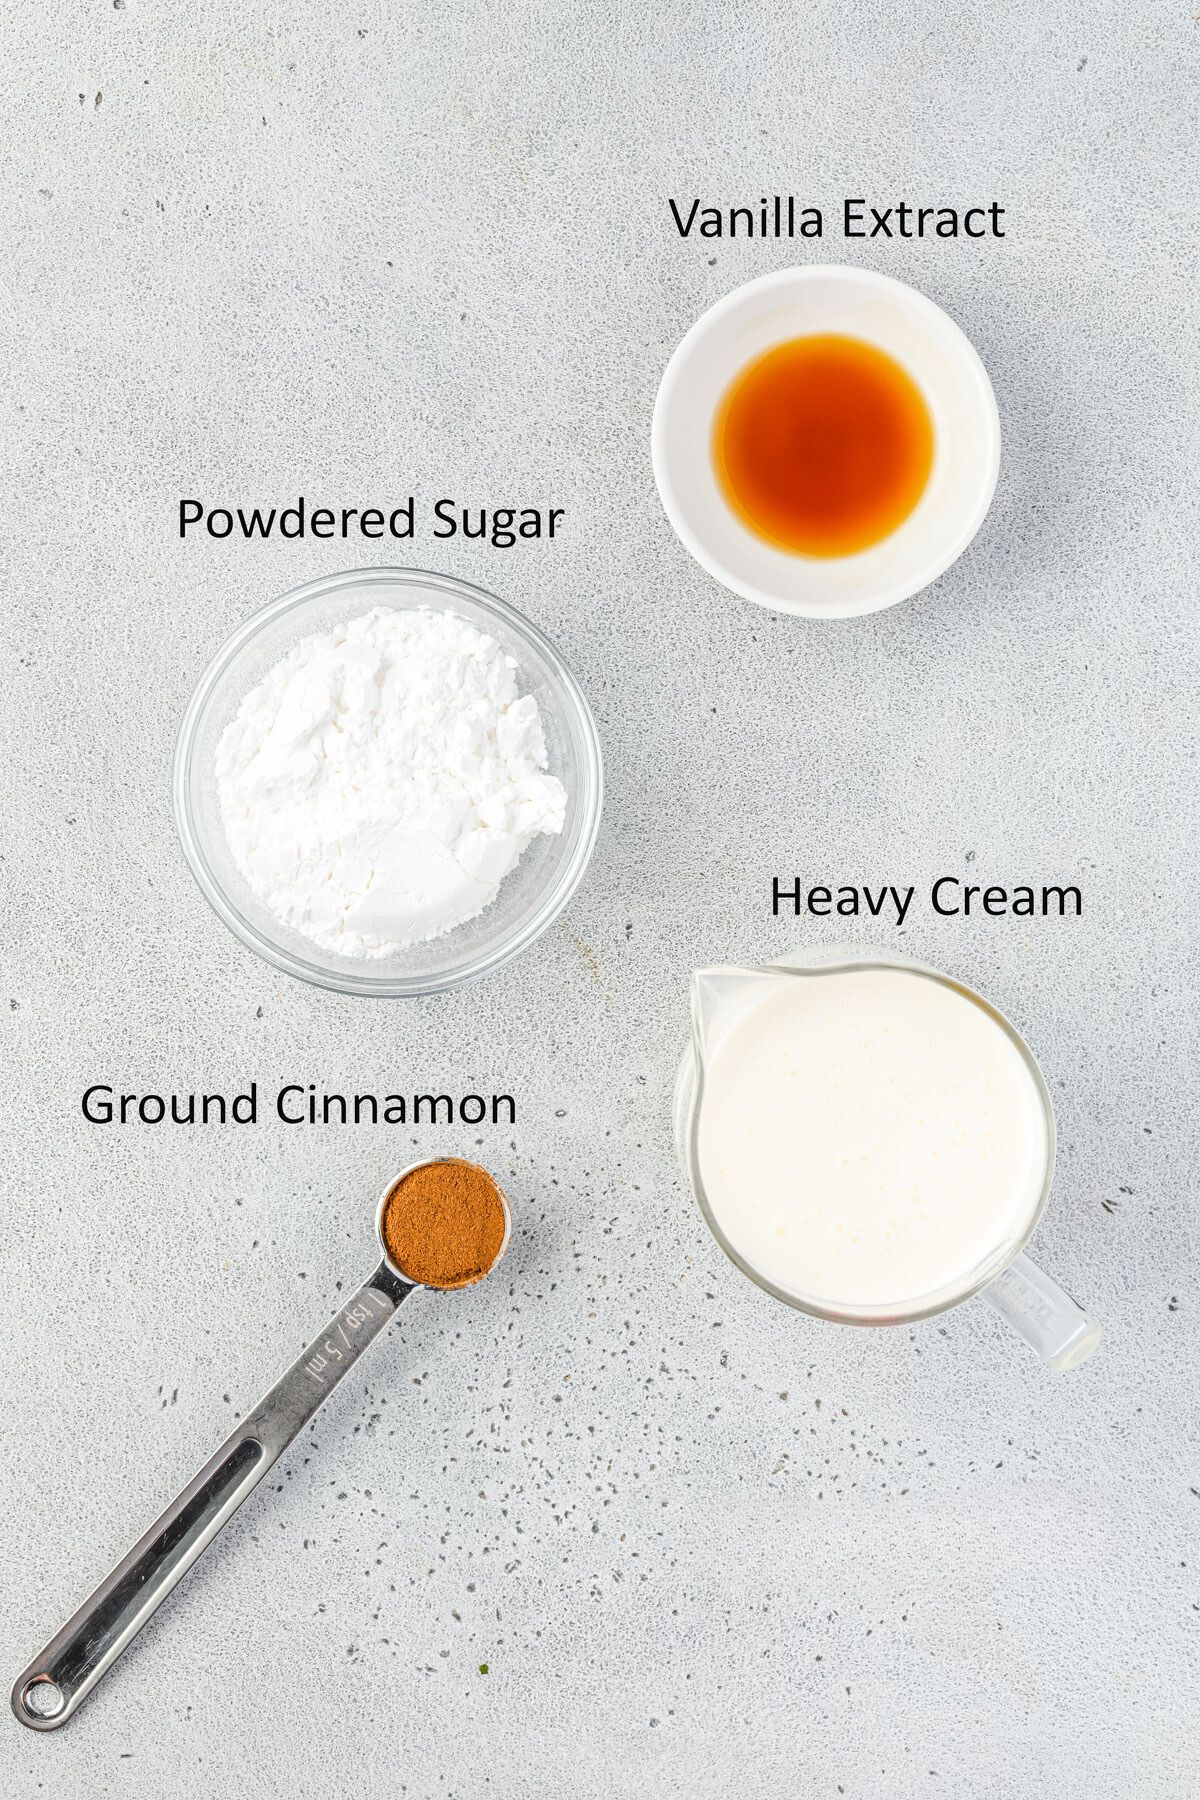 Ingredients for whipped cream in individual bowls.